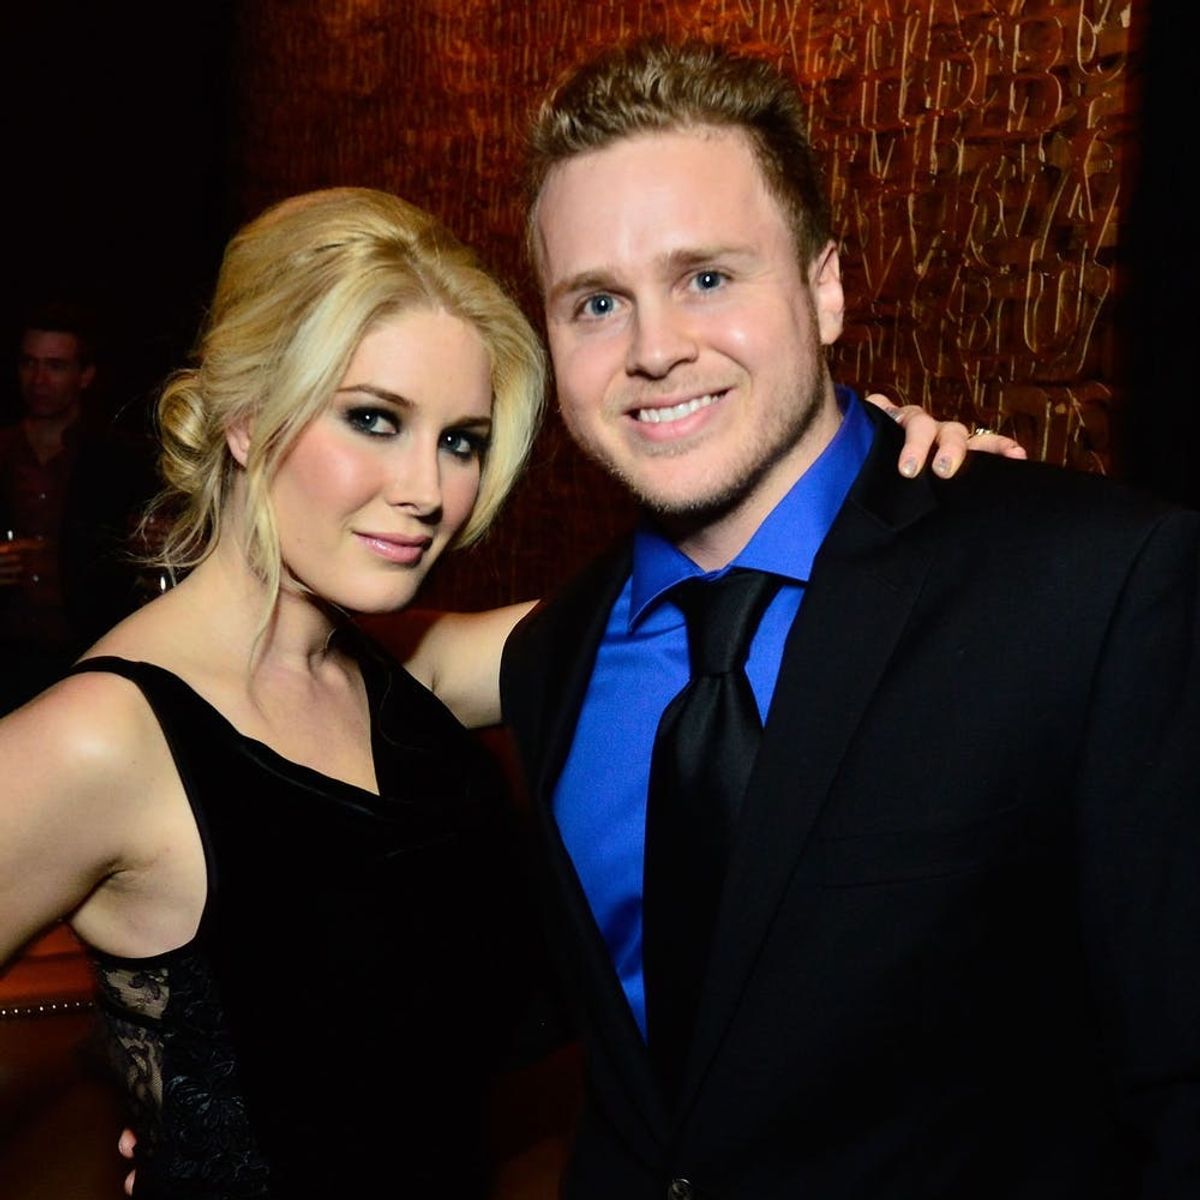 Spencer Pratt Has a Request for His Son in Light of the Rumored Kardashian-Jenner Pregnancies